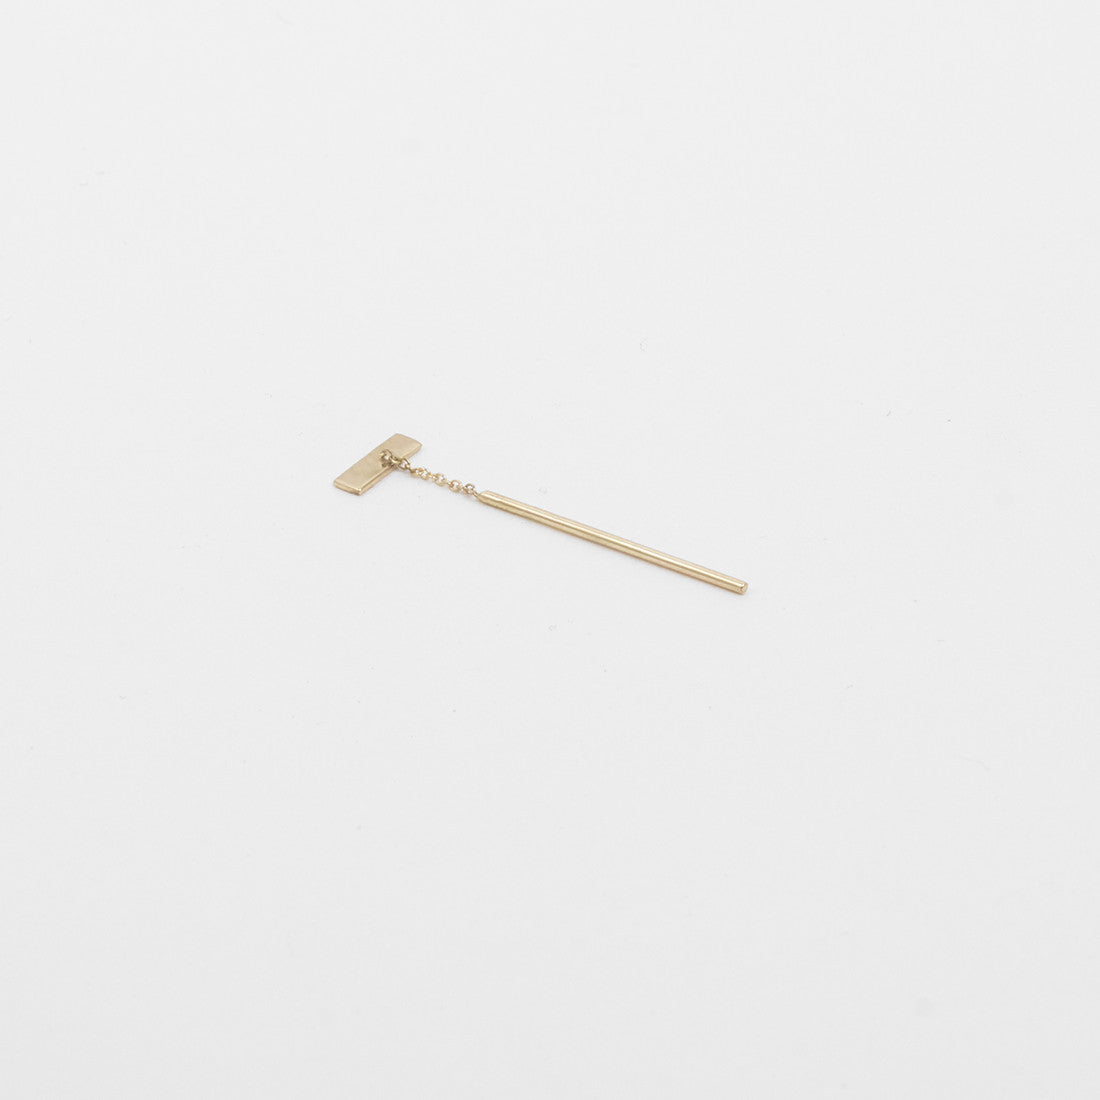 Tili Short Unique Pull Through Earring in 14k Gold By SHW Fine Jewelry New York City